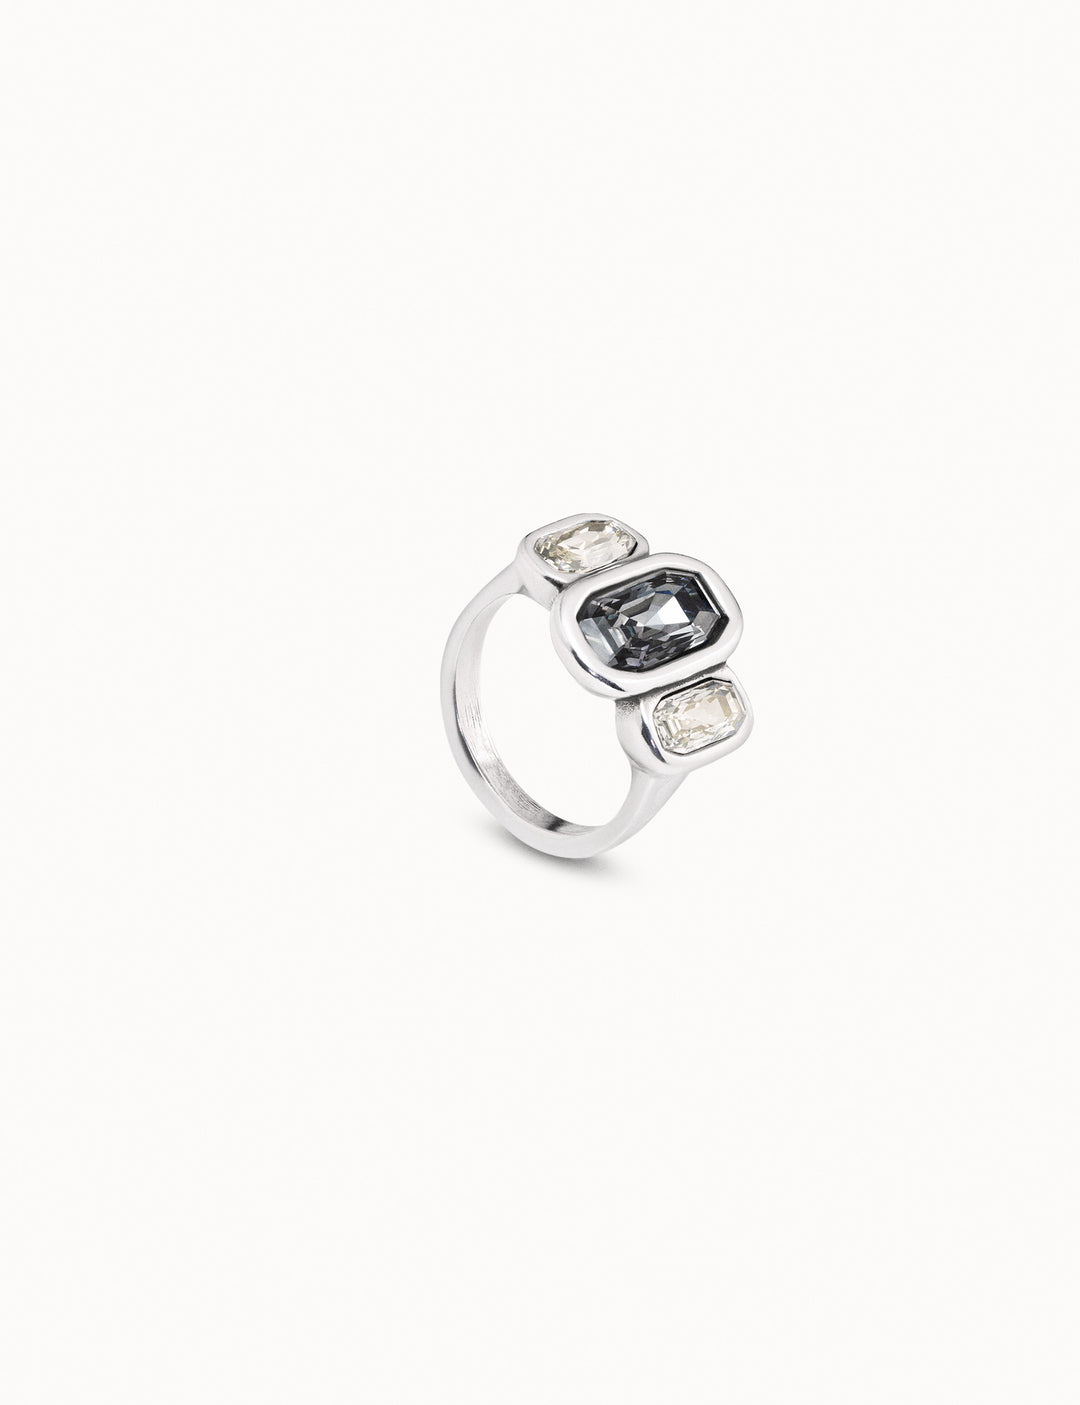 ASCEPLIUS RING - Kingfisher Road - Online Boutique